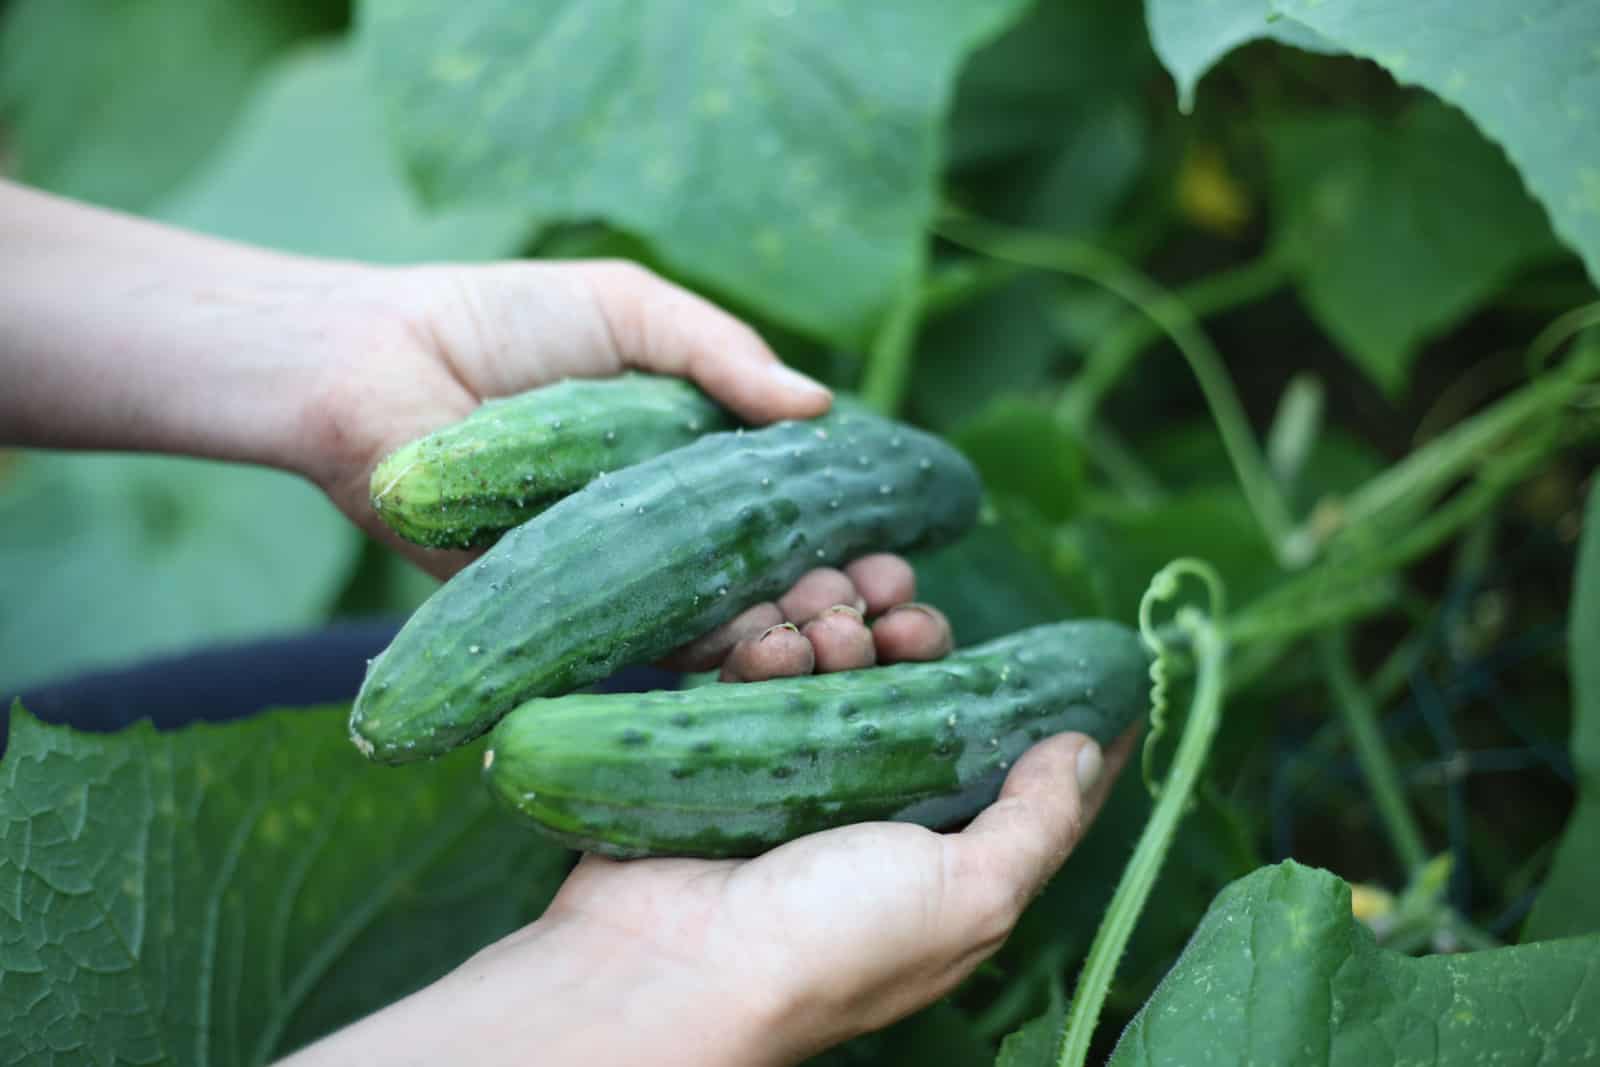 Closeup Focused View of Farm Harvesting with Hands Holding Cucumbers